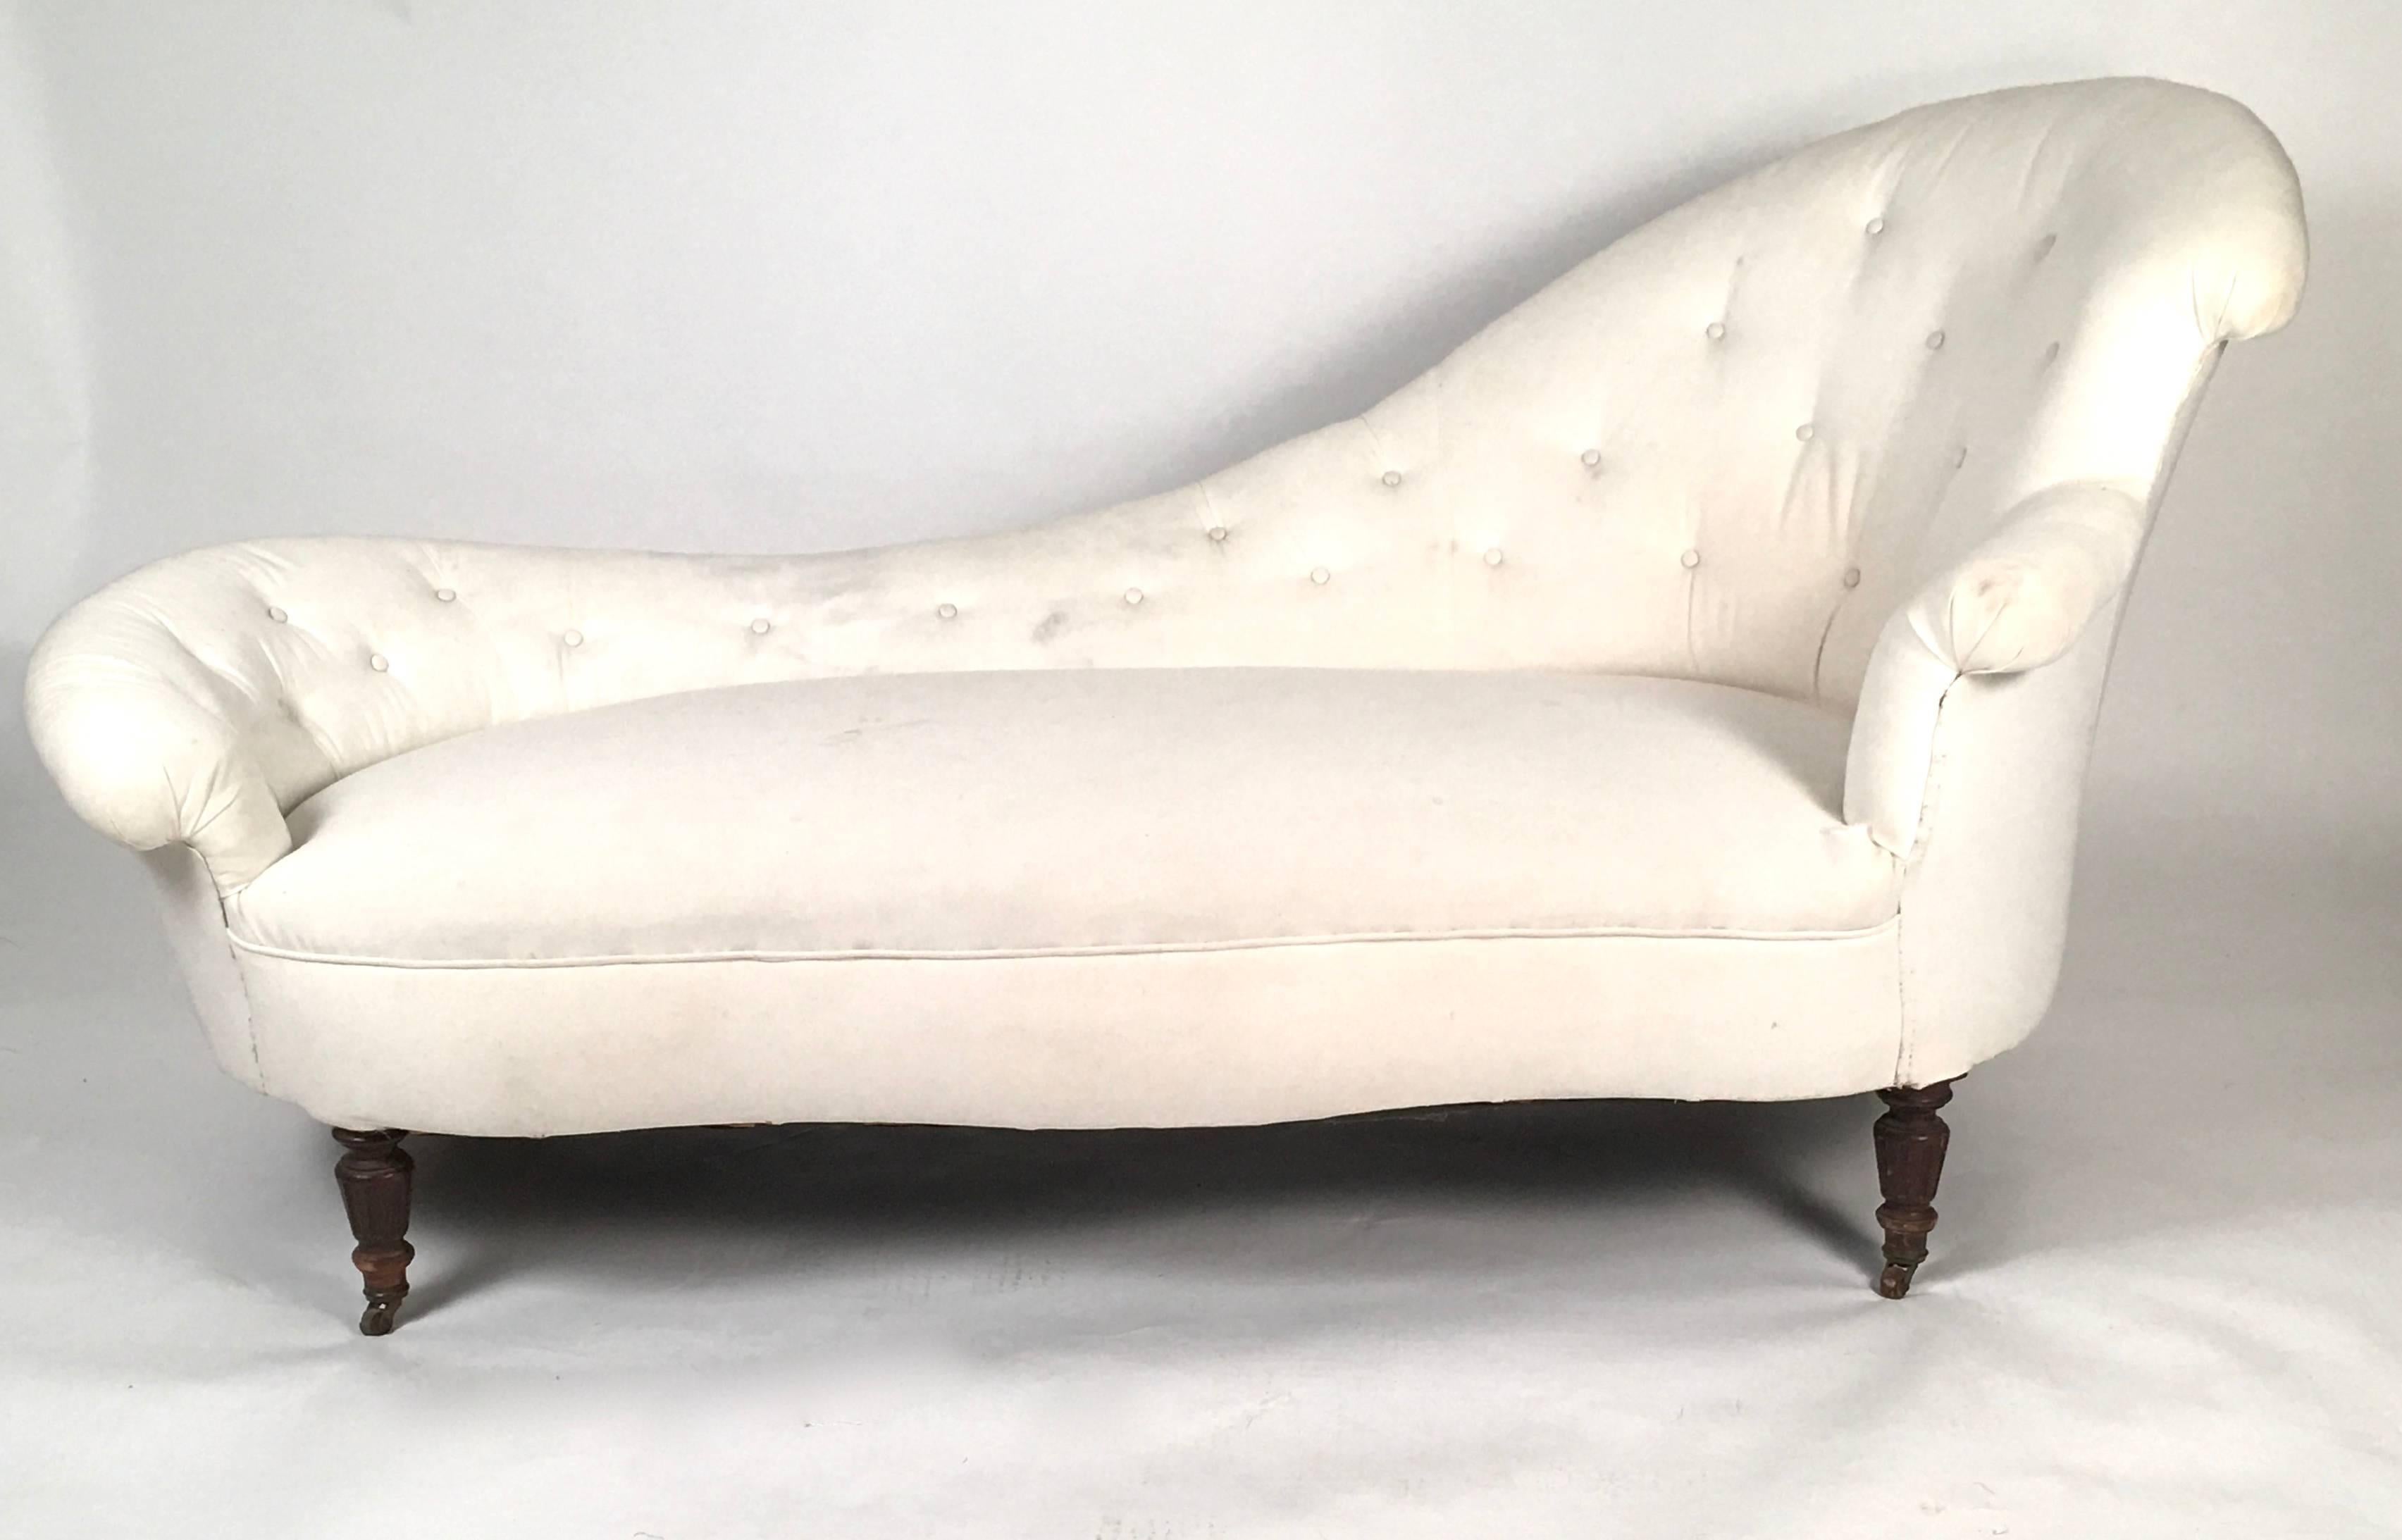 A large, comfortable and stylish Victorian chaise long, with beautifully curved back and sides and tufted back, on carved, fluted tapering legs. Currently in older white duck cloth, ready to be reupholstered in the fabric of your choice. 